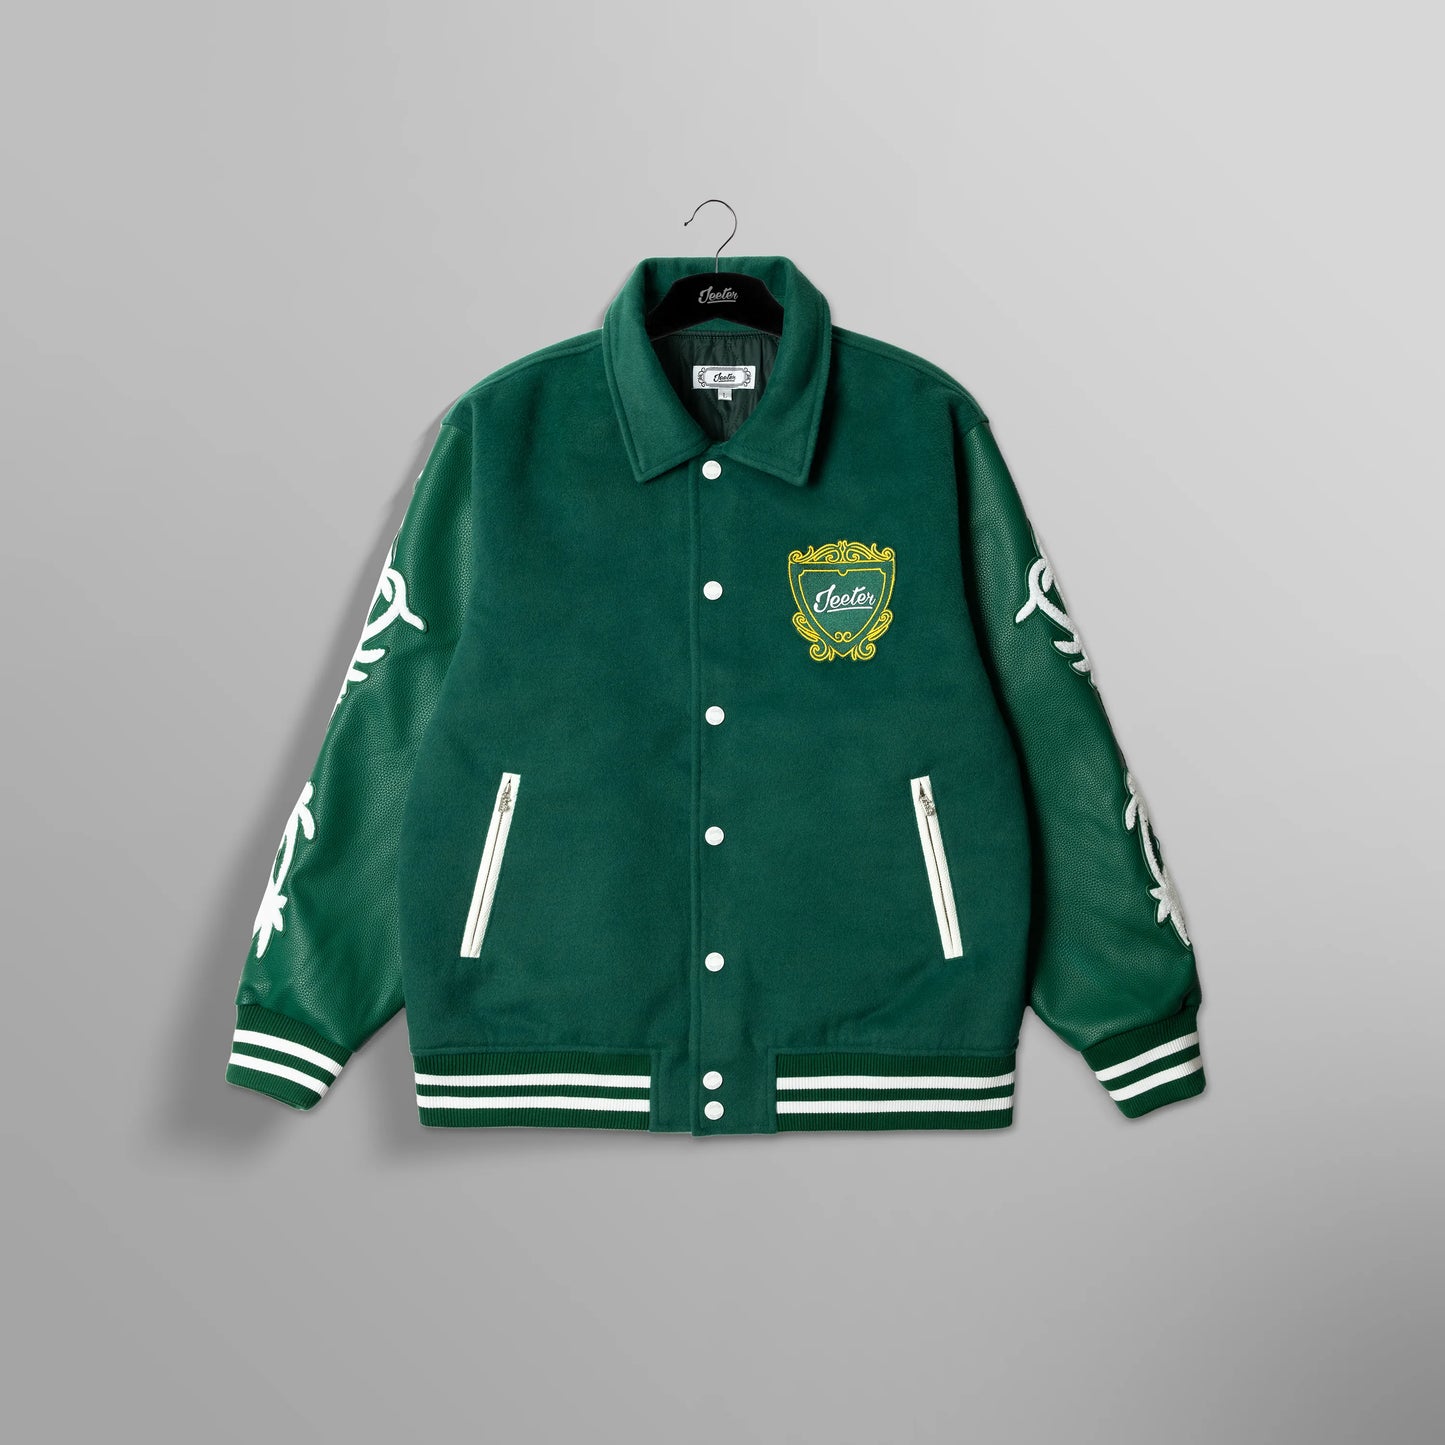 The Green Jacket